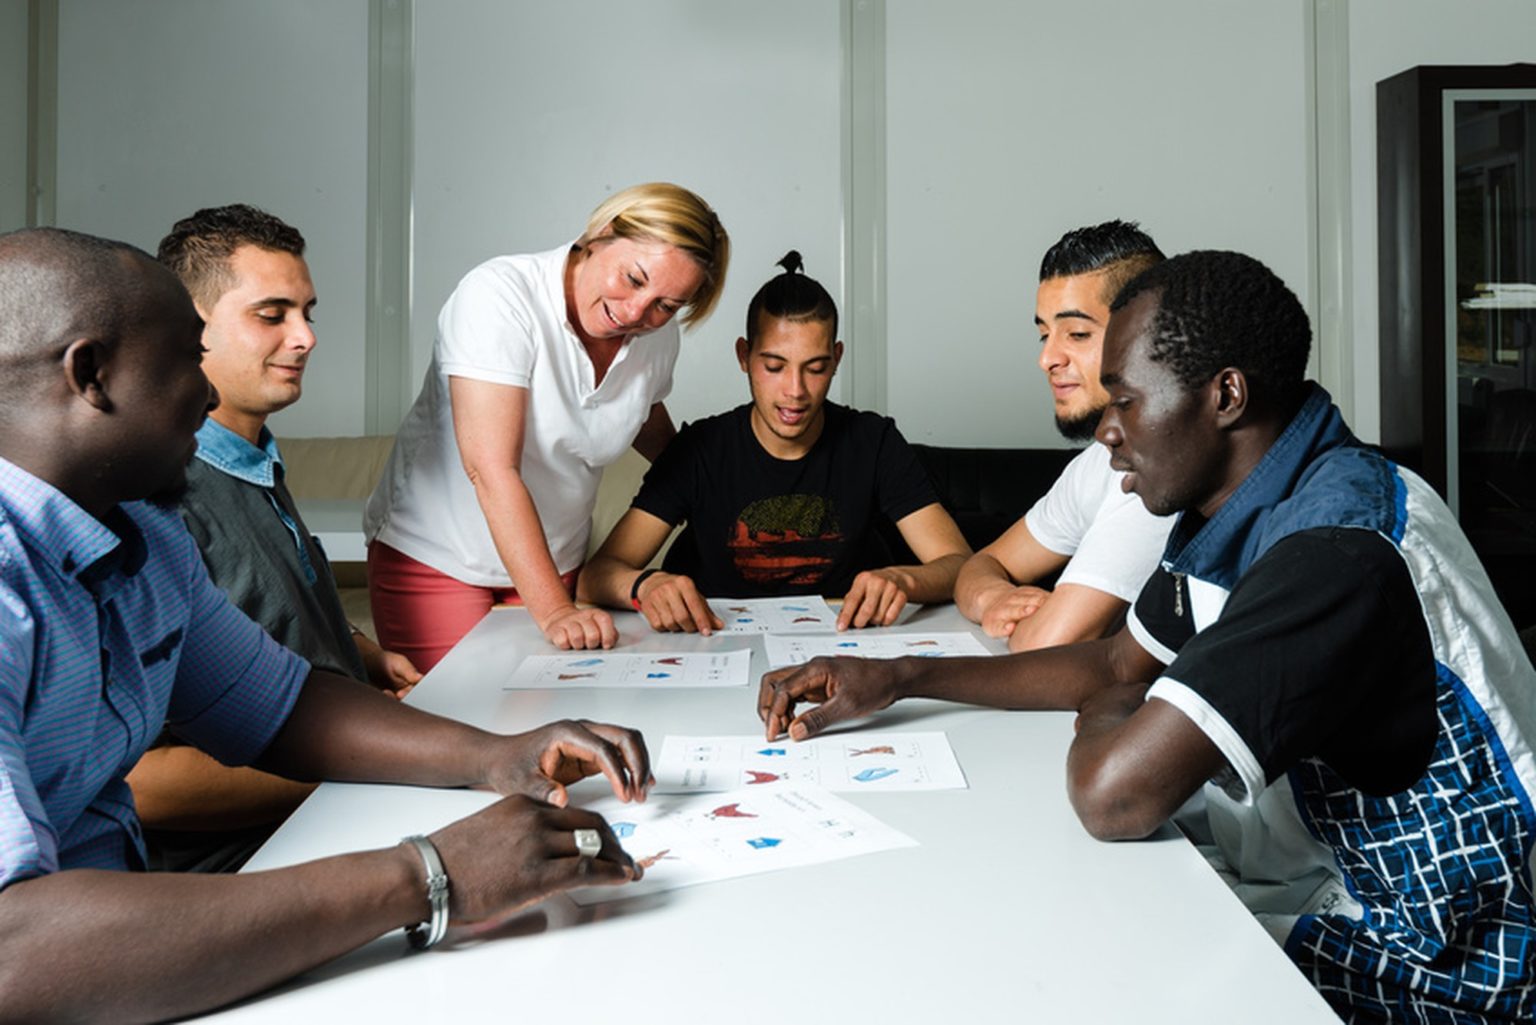 language-training-for-refugees-in-a-german-camp